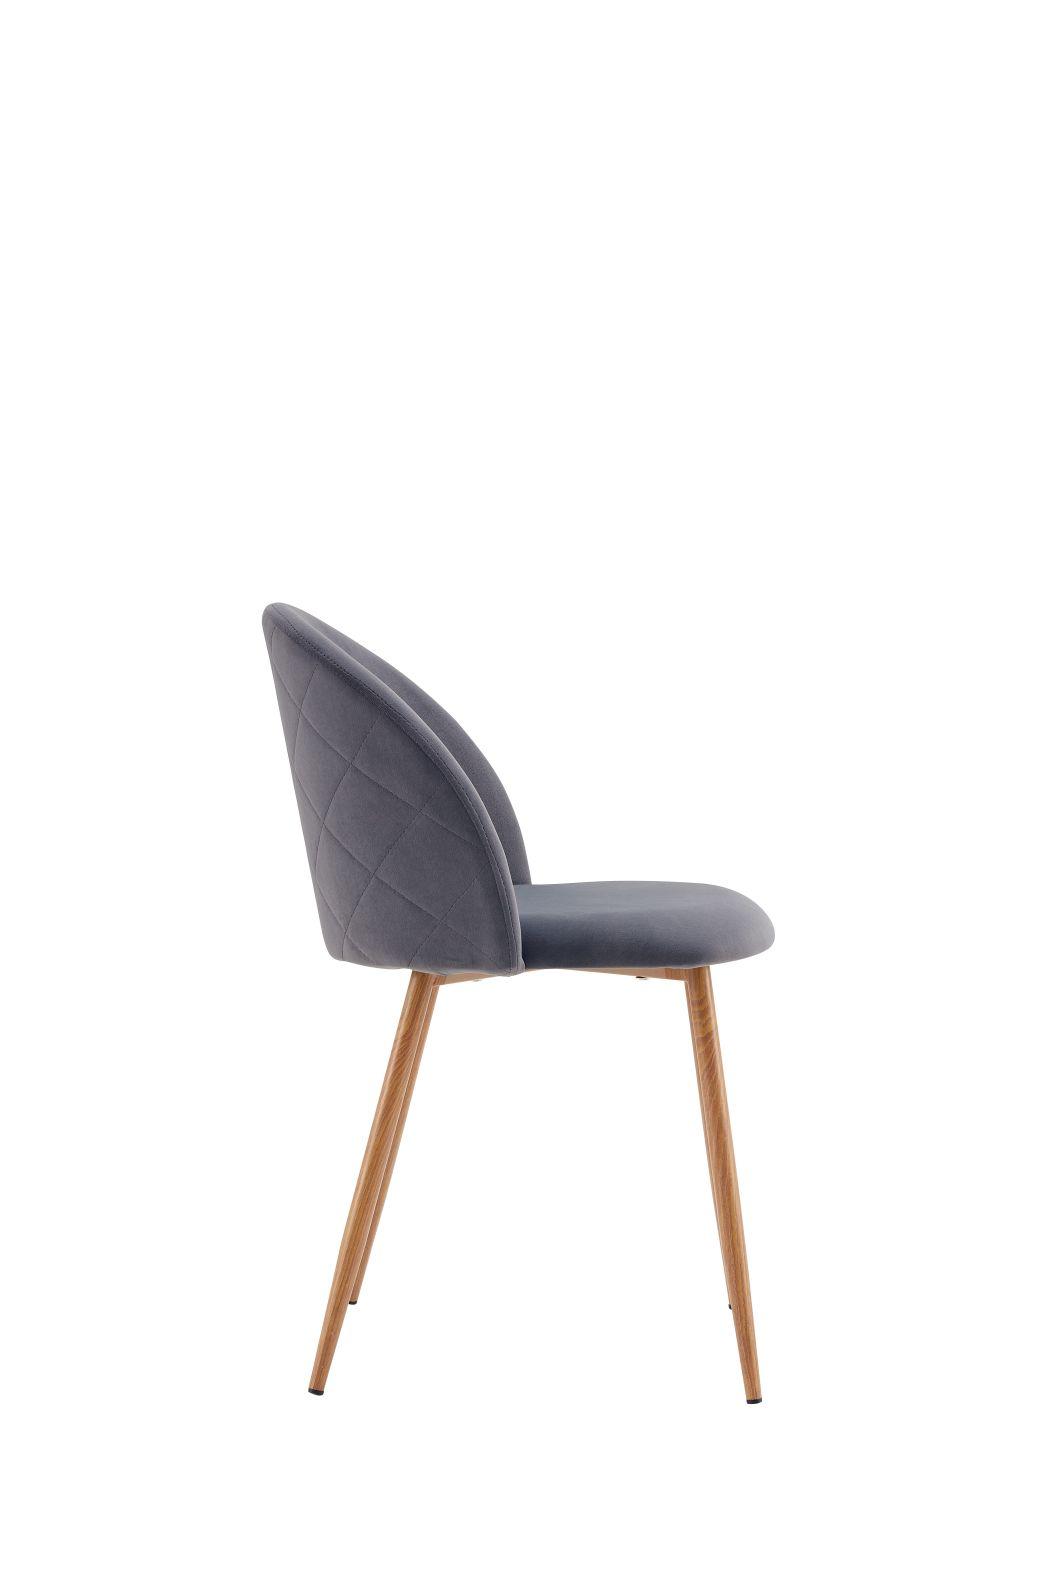 2021 Factory Supply Top One Best Selling Grey Velvet Fabric Dining Chair with Armrest and Wood Legs